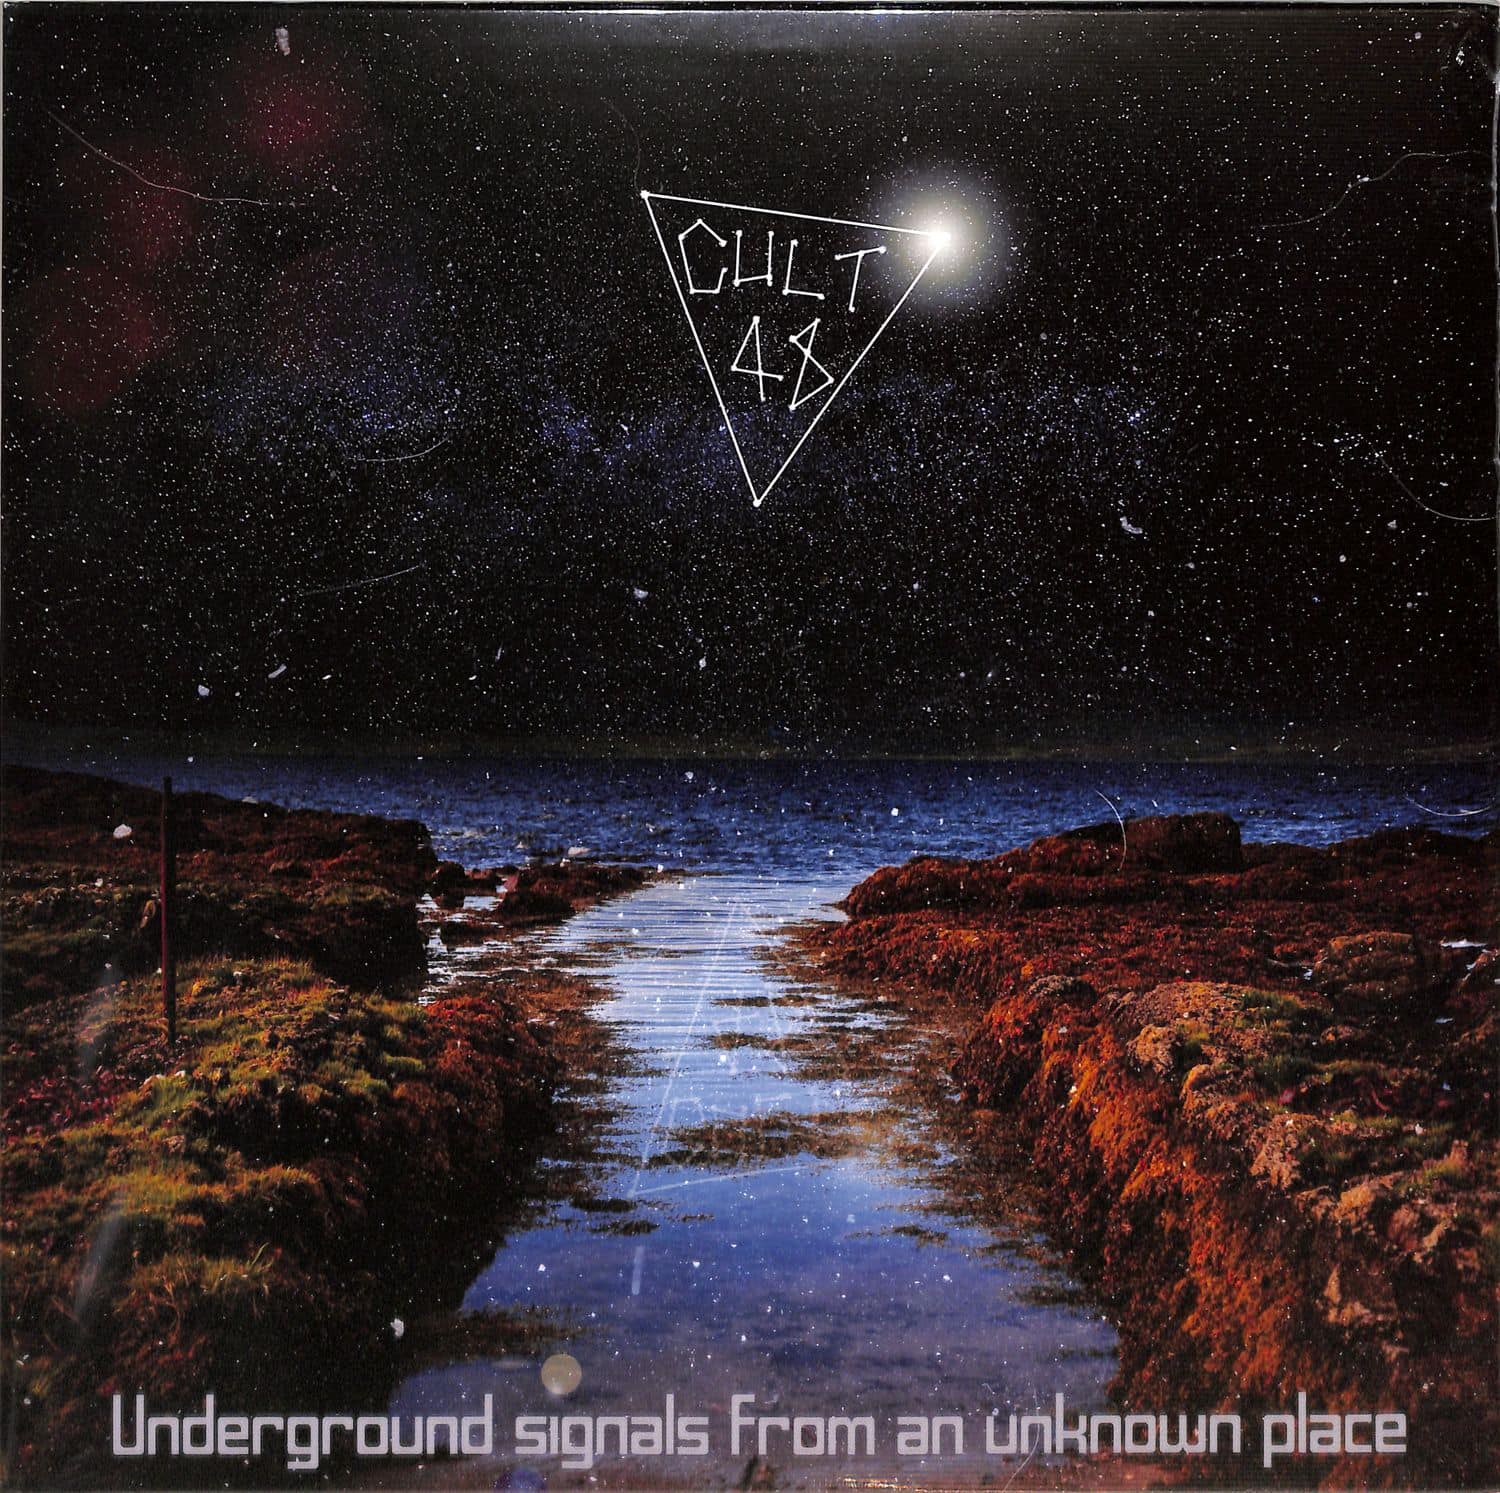 Cult 48 - UNDERGROUND SIGNALS FROM AN UNKNOWN PLACE 